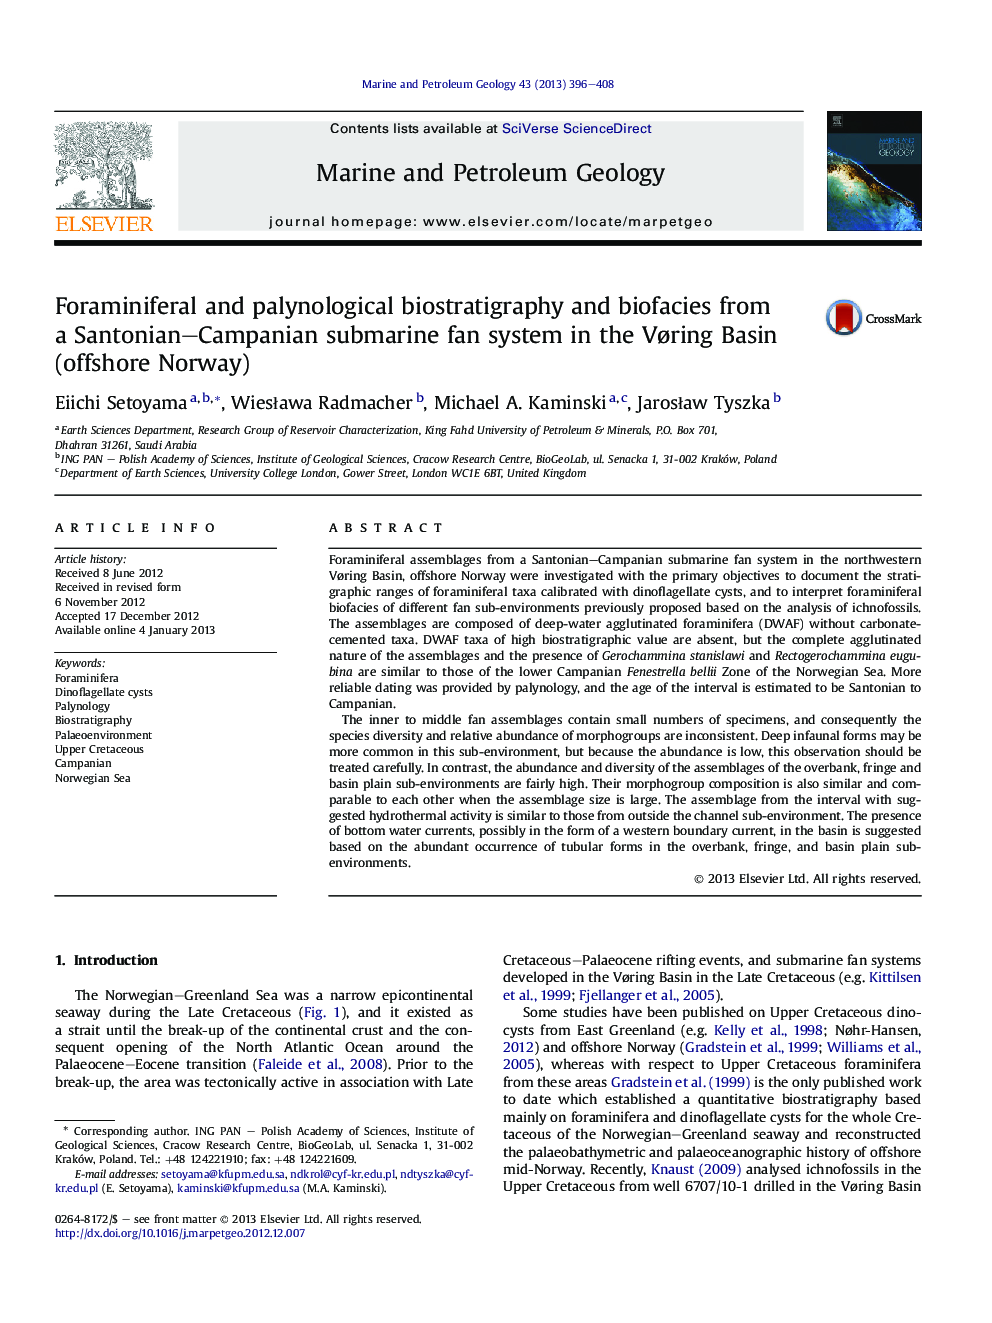 Foraminiferal and palynological biostratigraphy and biofacies from a Santonian-Campanian submarine fan system in the VÃ¸ring Basin (offshore Norway)